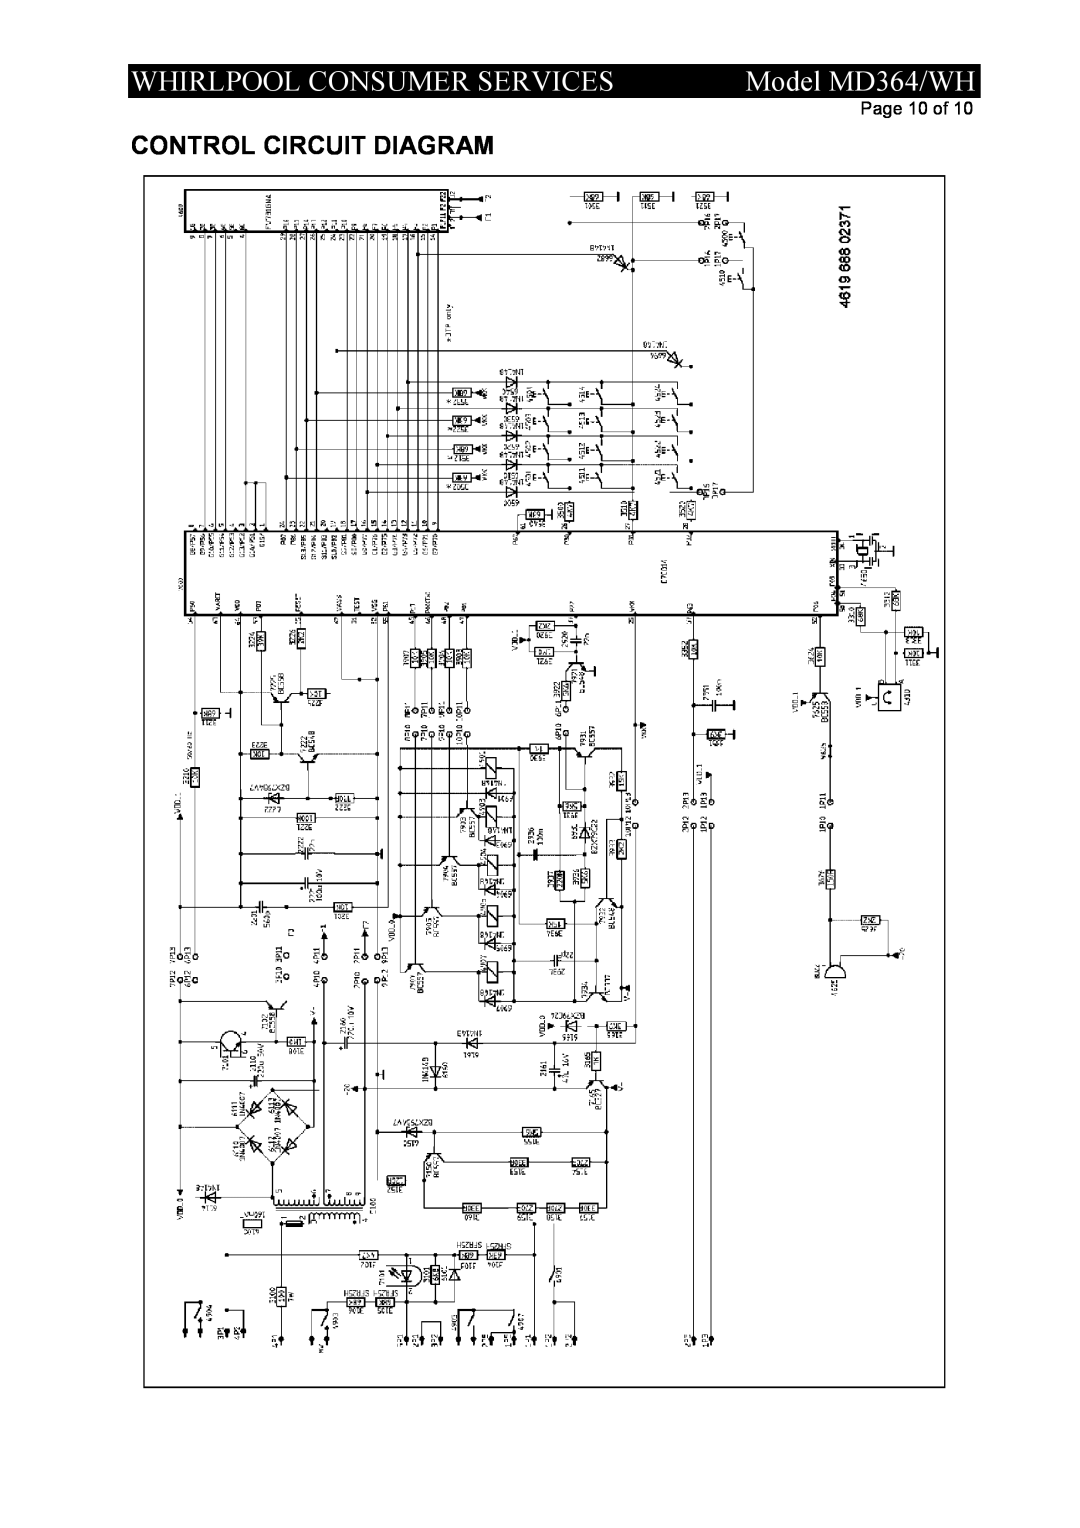 Whirlpool service manual Control Circuit Diagram, Whirlpool Consumer Services, Model MD364/WH, Page 10 of 